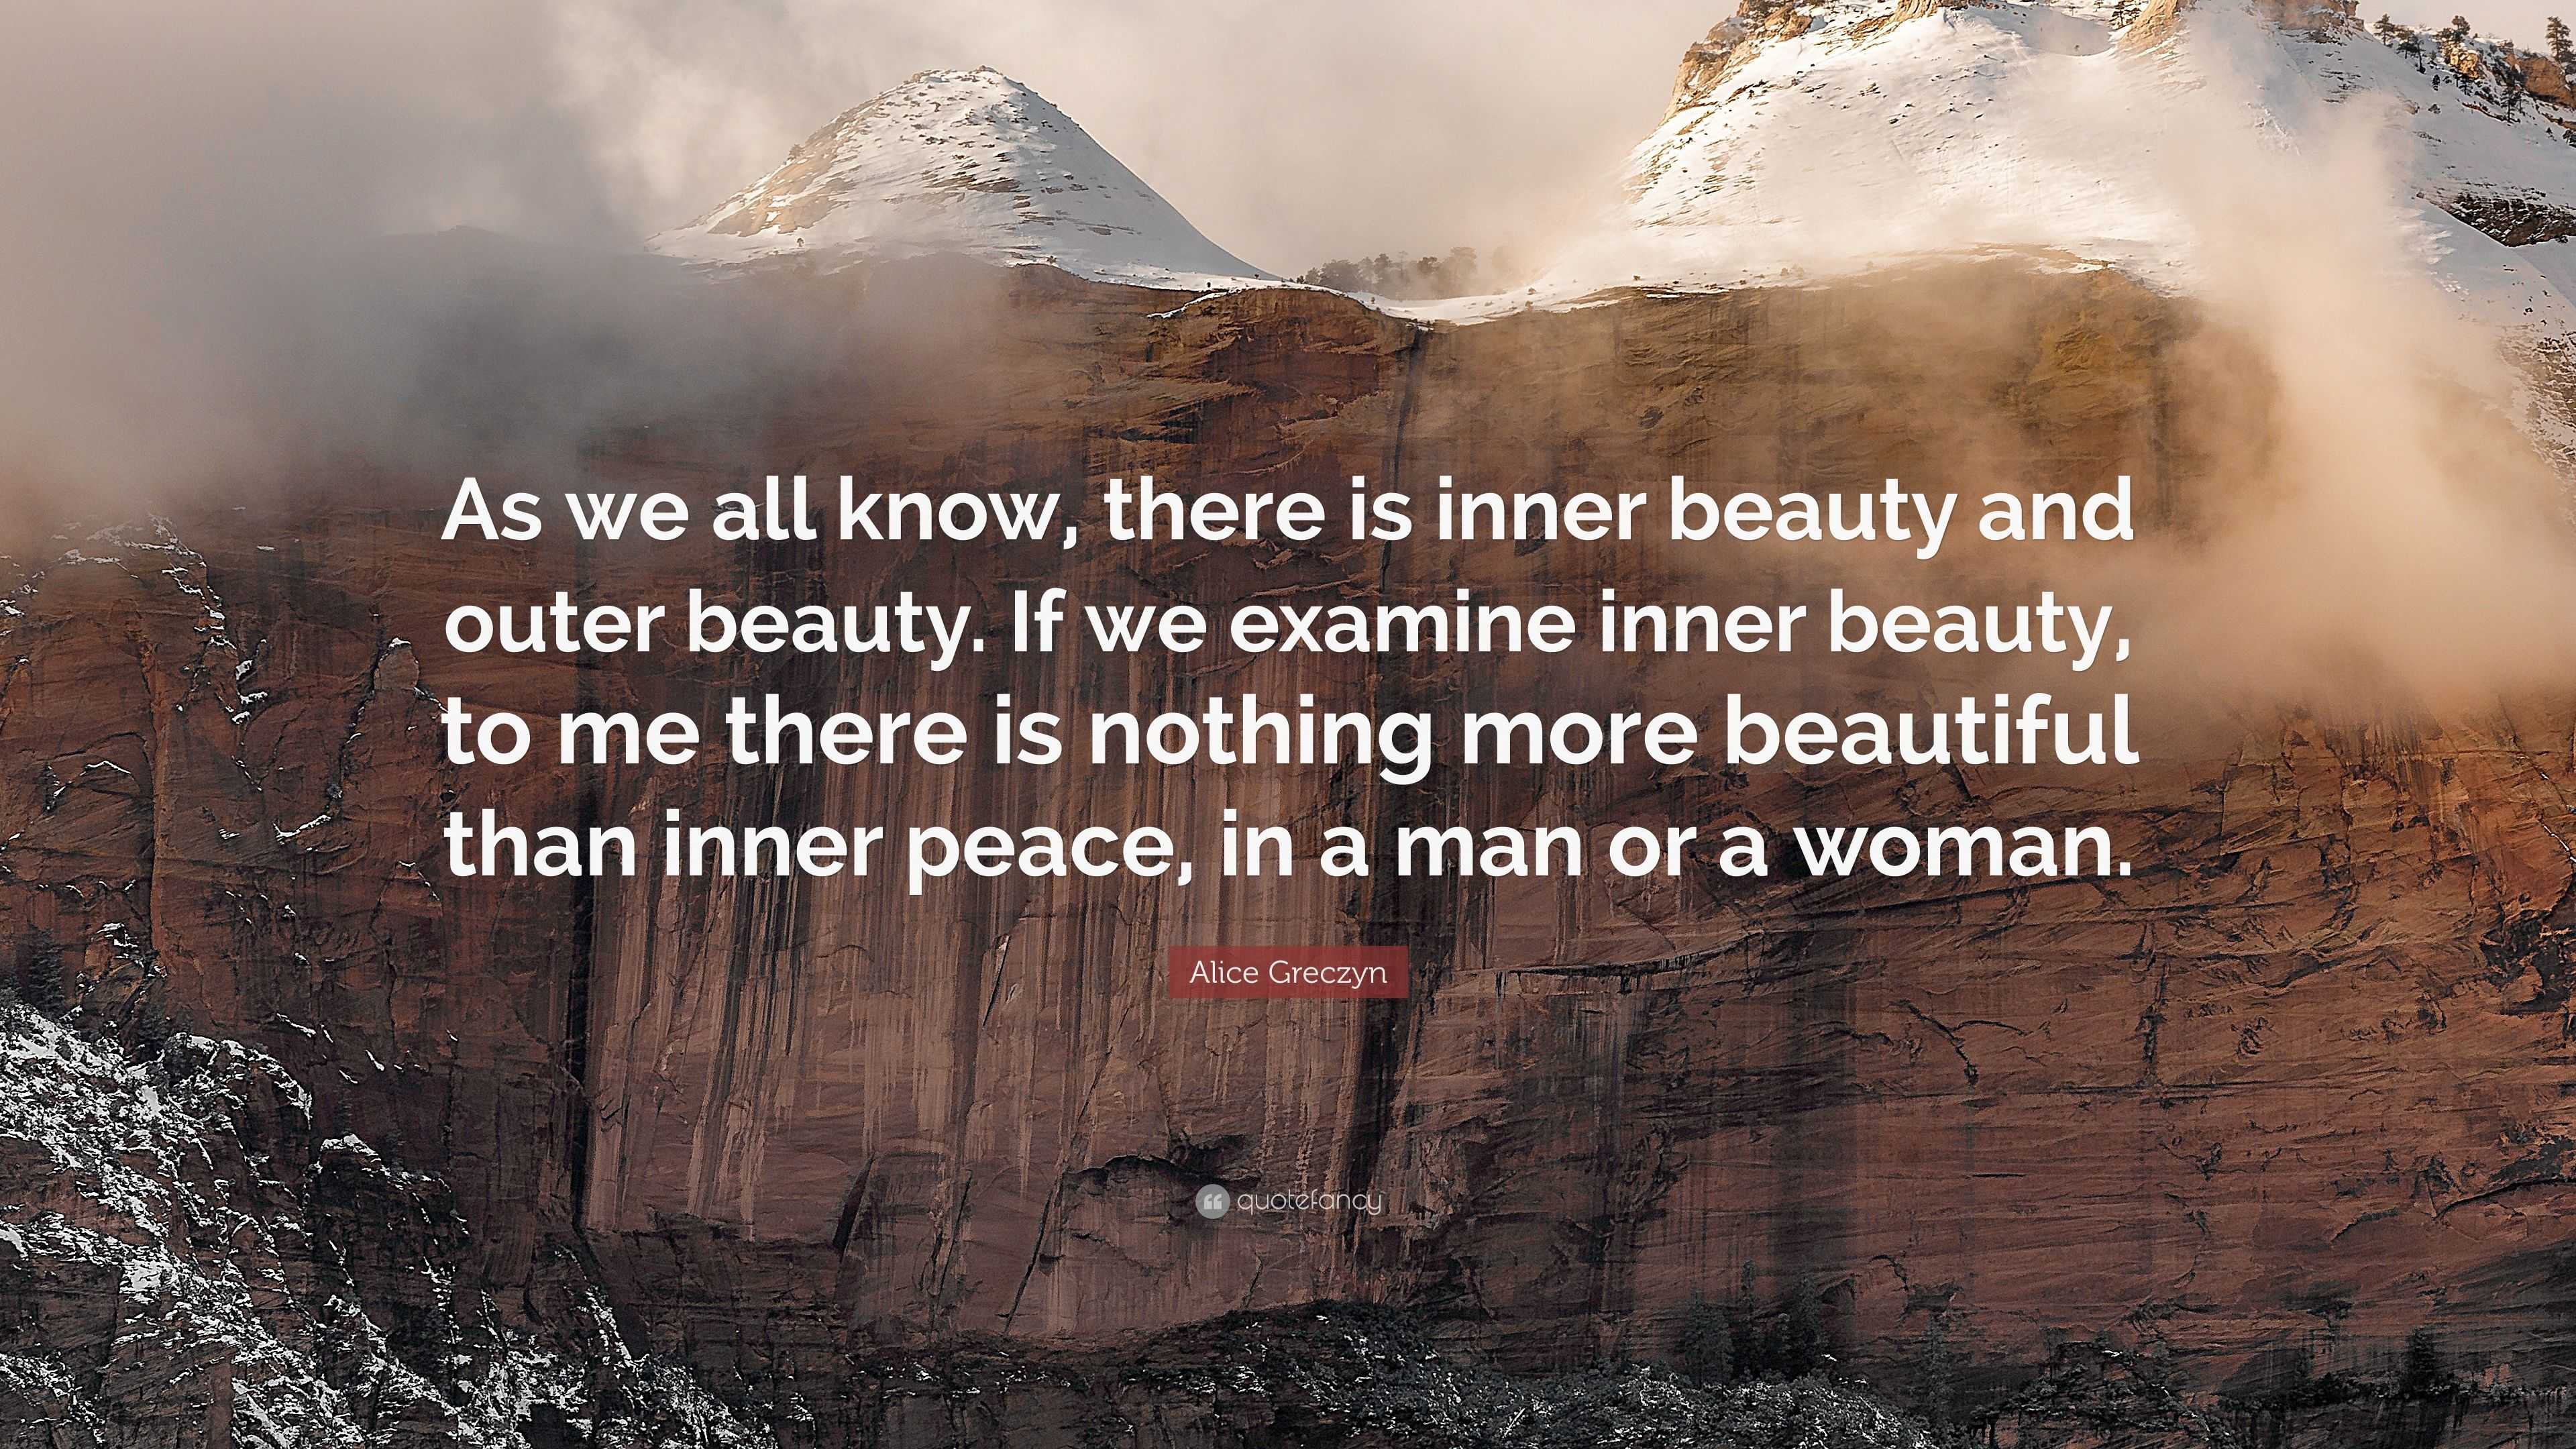 Alice Greczyn Quote: “As we all know, there is inner beauty and outer ...